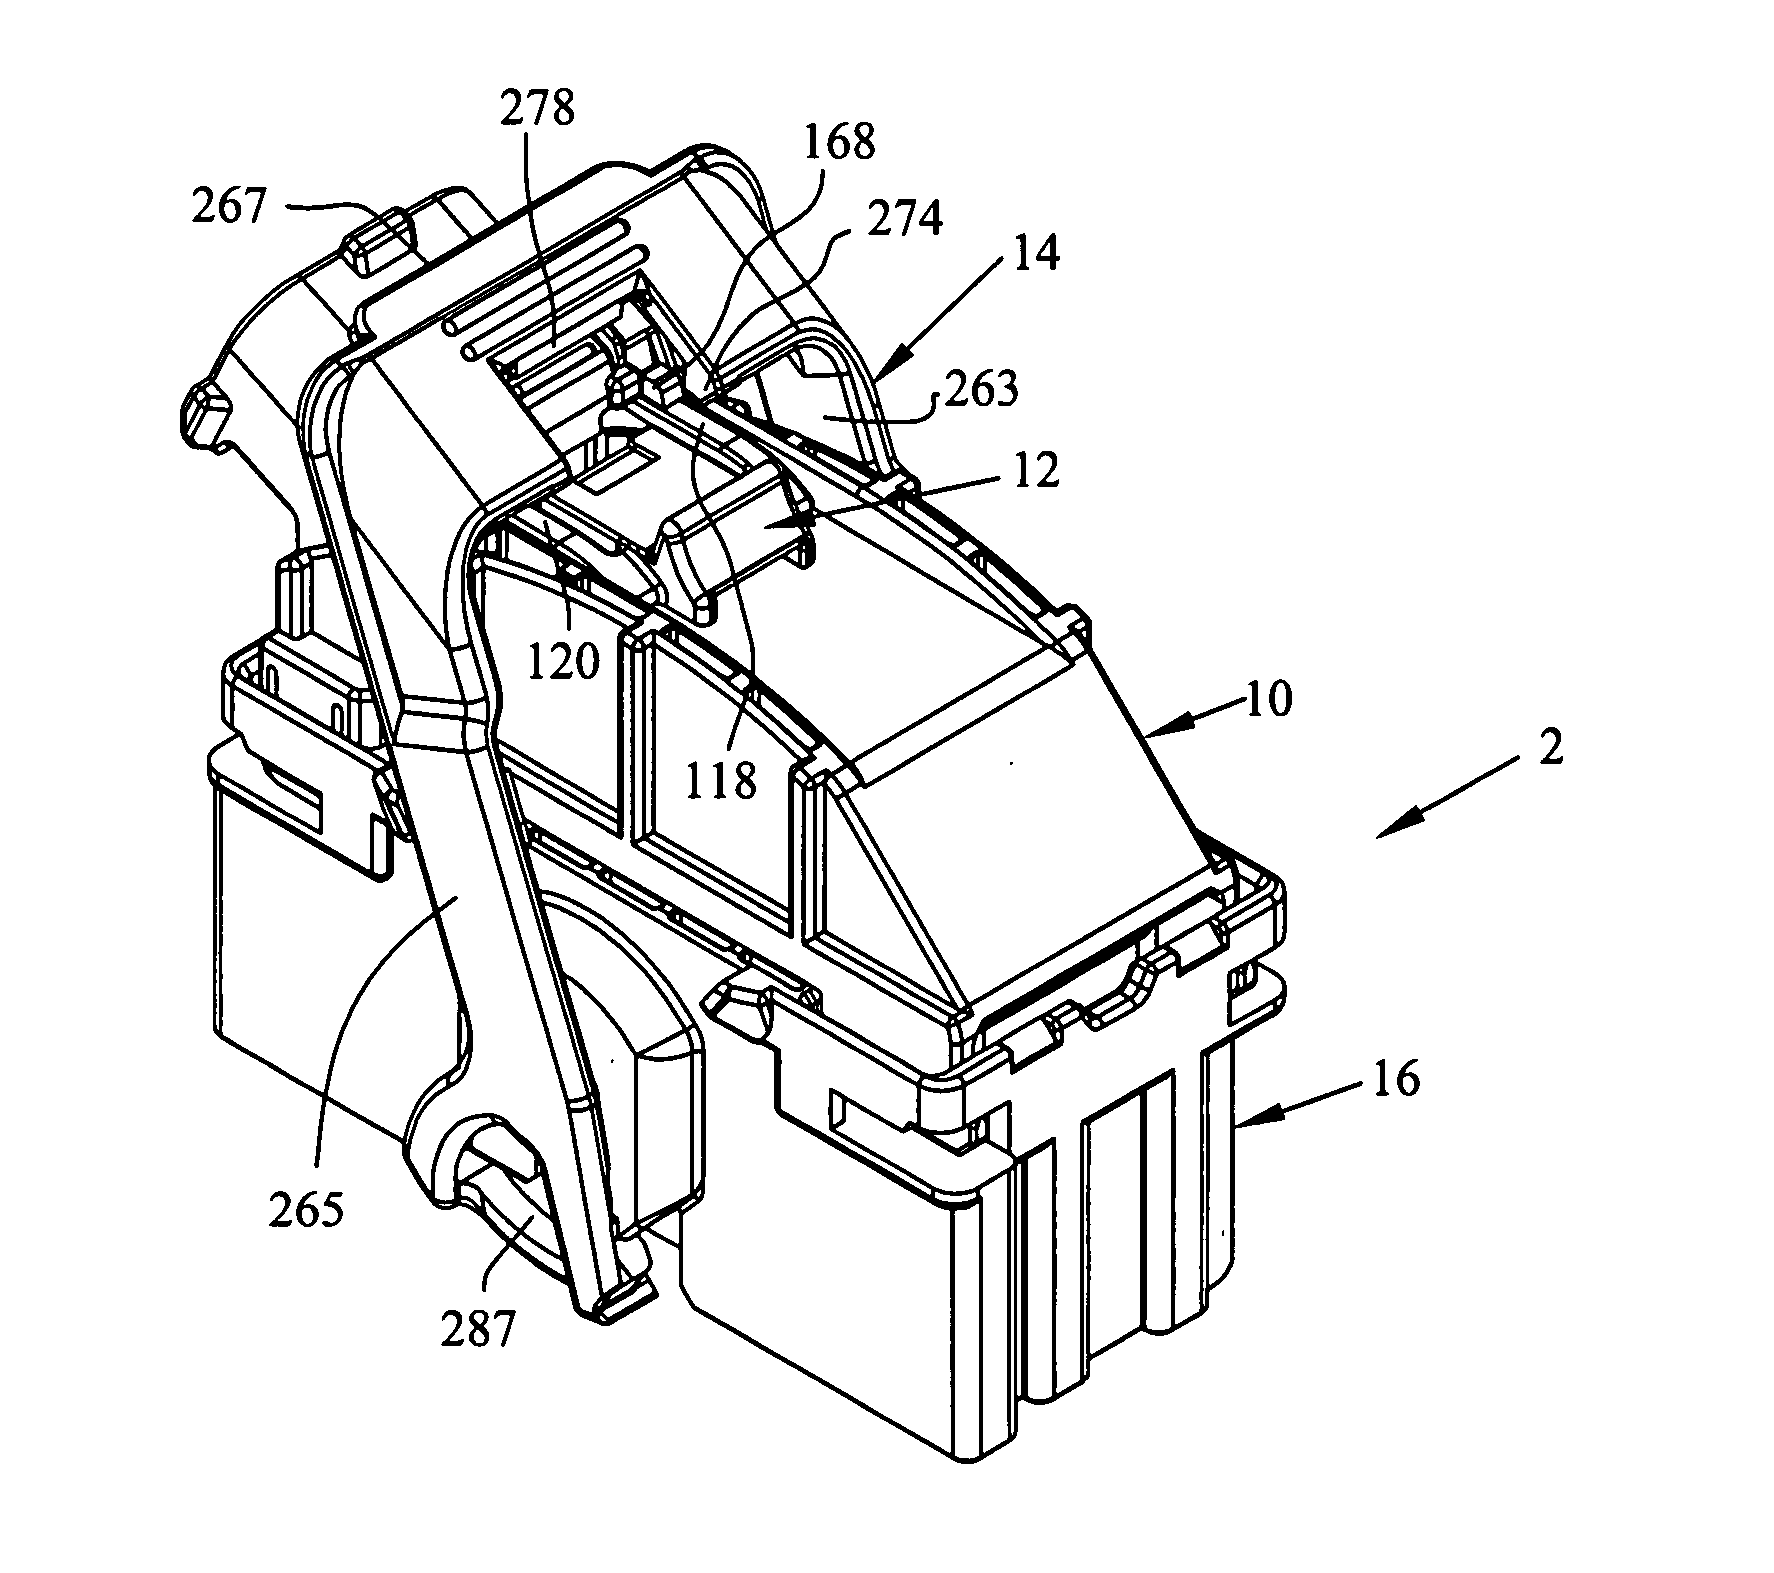 Lever mated connector assembly with a latching and overstress mechanism